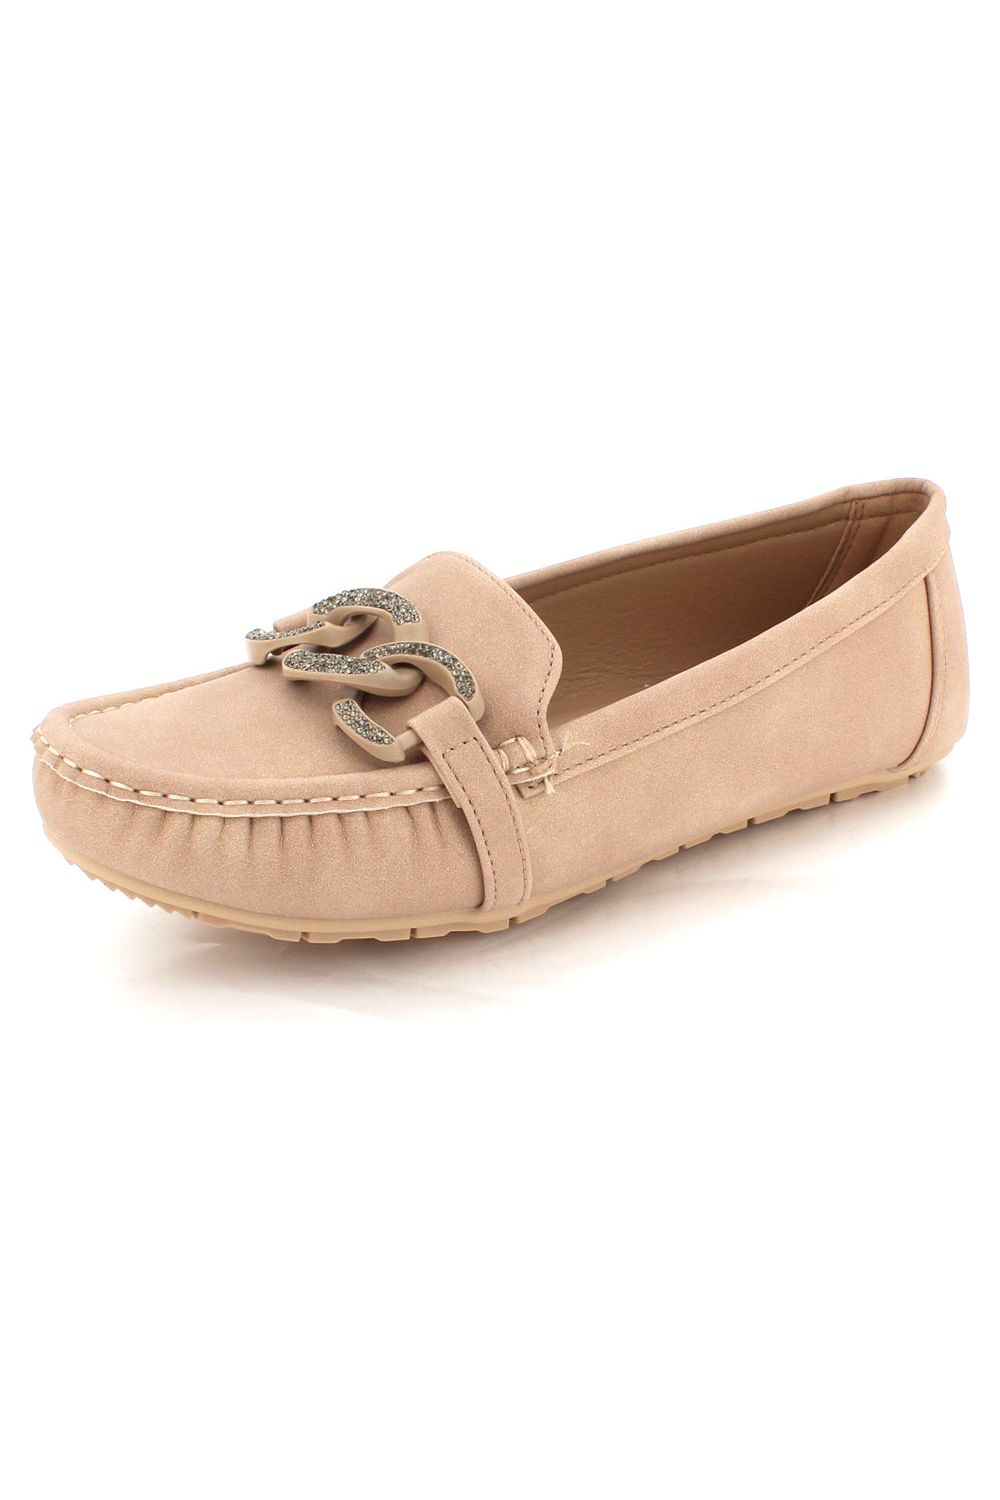 Comfort Casual Lightweight Everyday Office Work Moccasins Loafer L8087